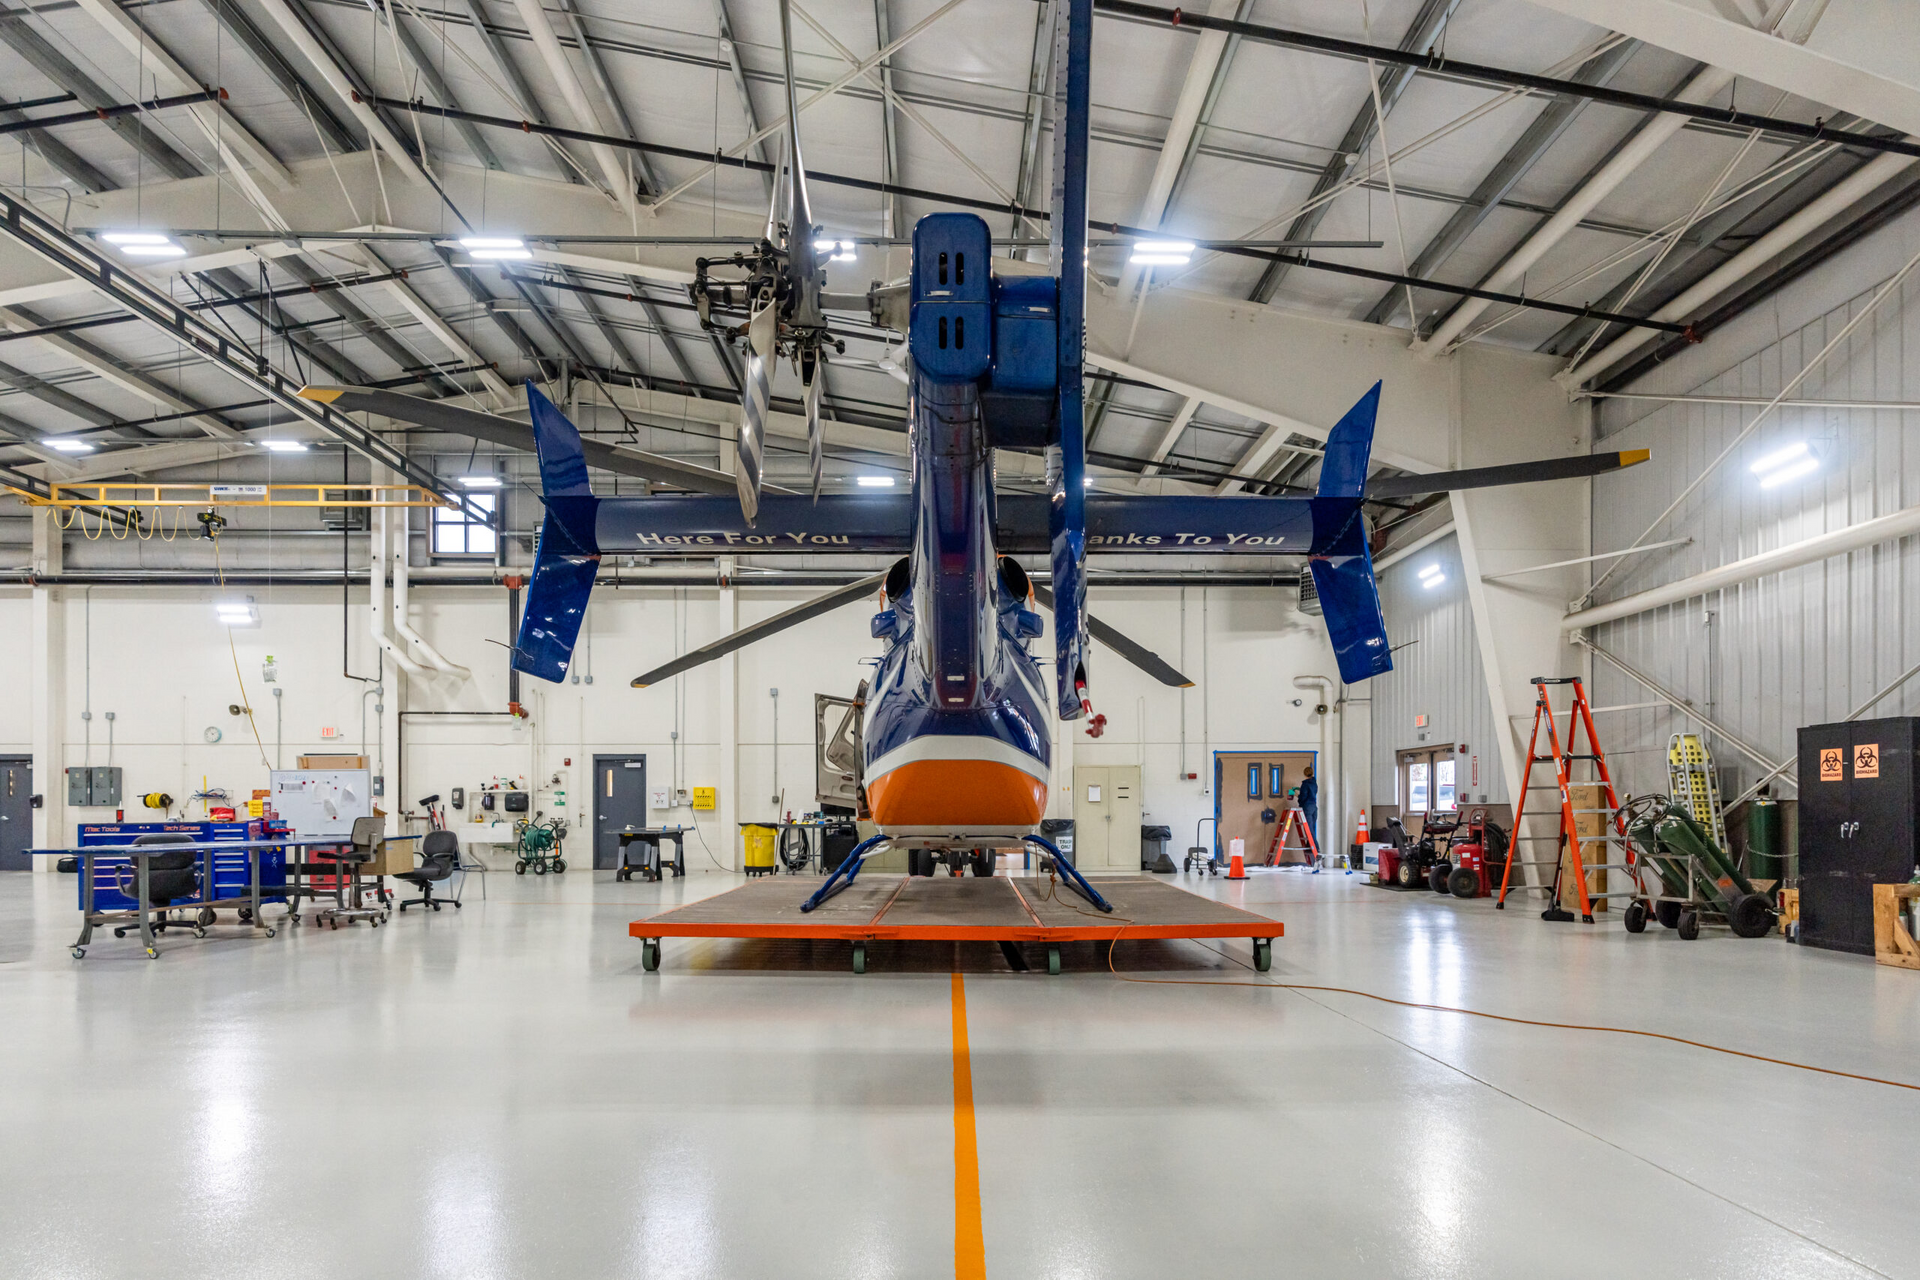 a blue and orange helicopter is parked in a hangar .